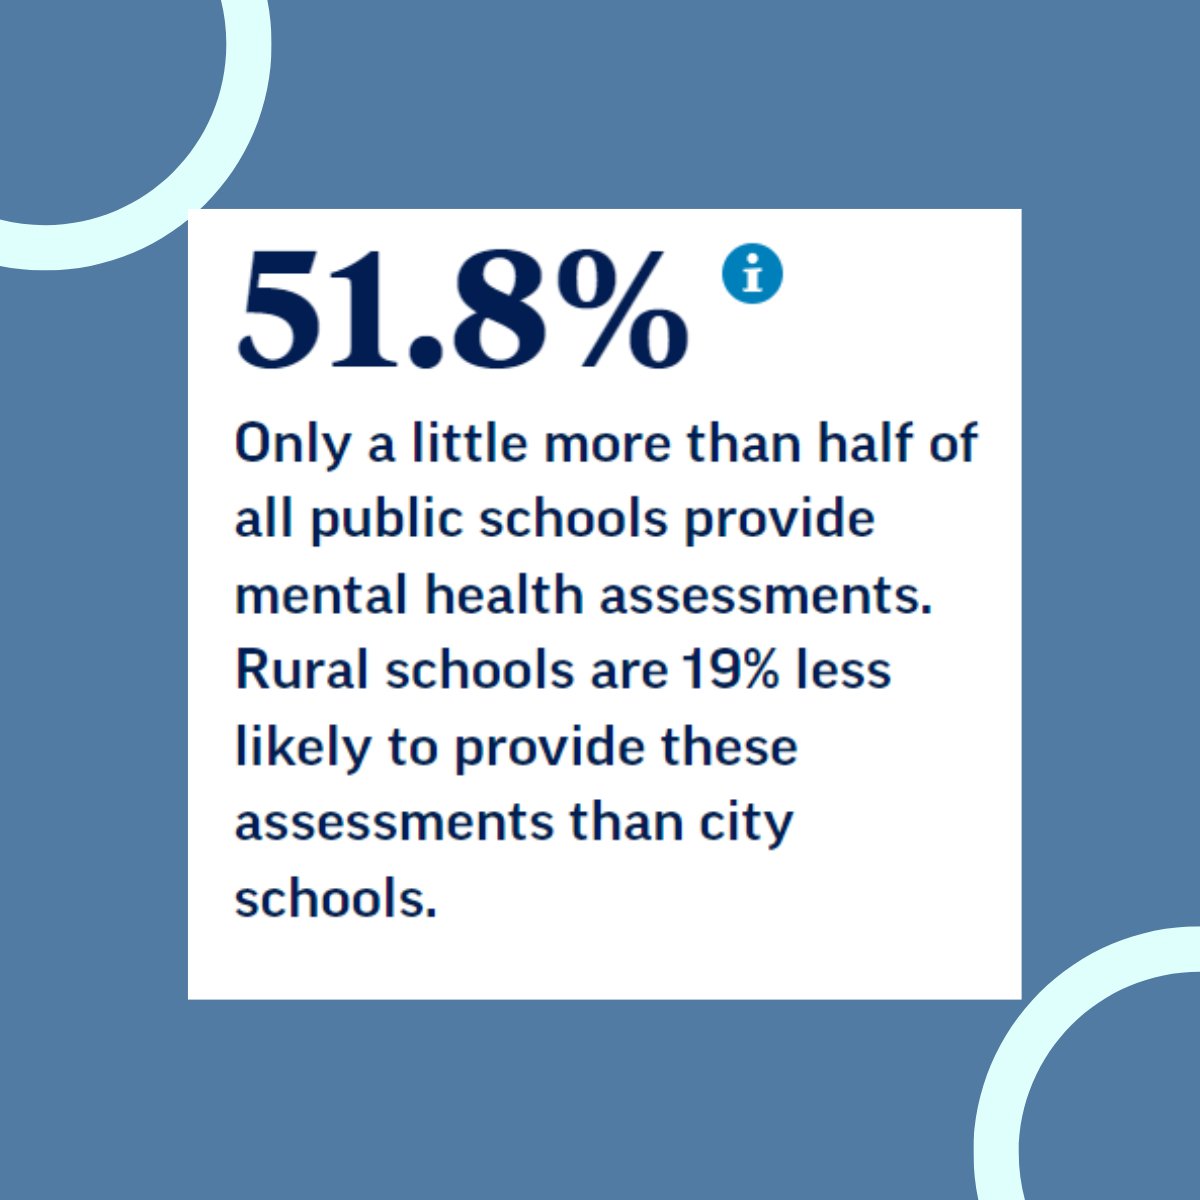 🏫 #Schoolcounselors and psychologists play a vital role in supporting students' social and emotional well-being. Let's advocate for more resources and training to meet the growing mental health needs of our #youth. #SupportCounselors #StudentWellBeing
nea.org/nea-today/all-…